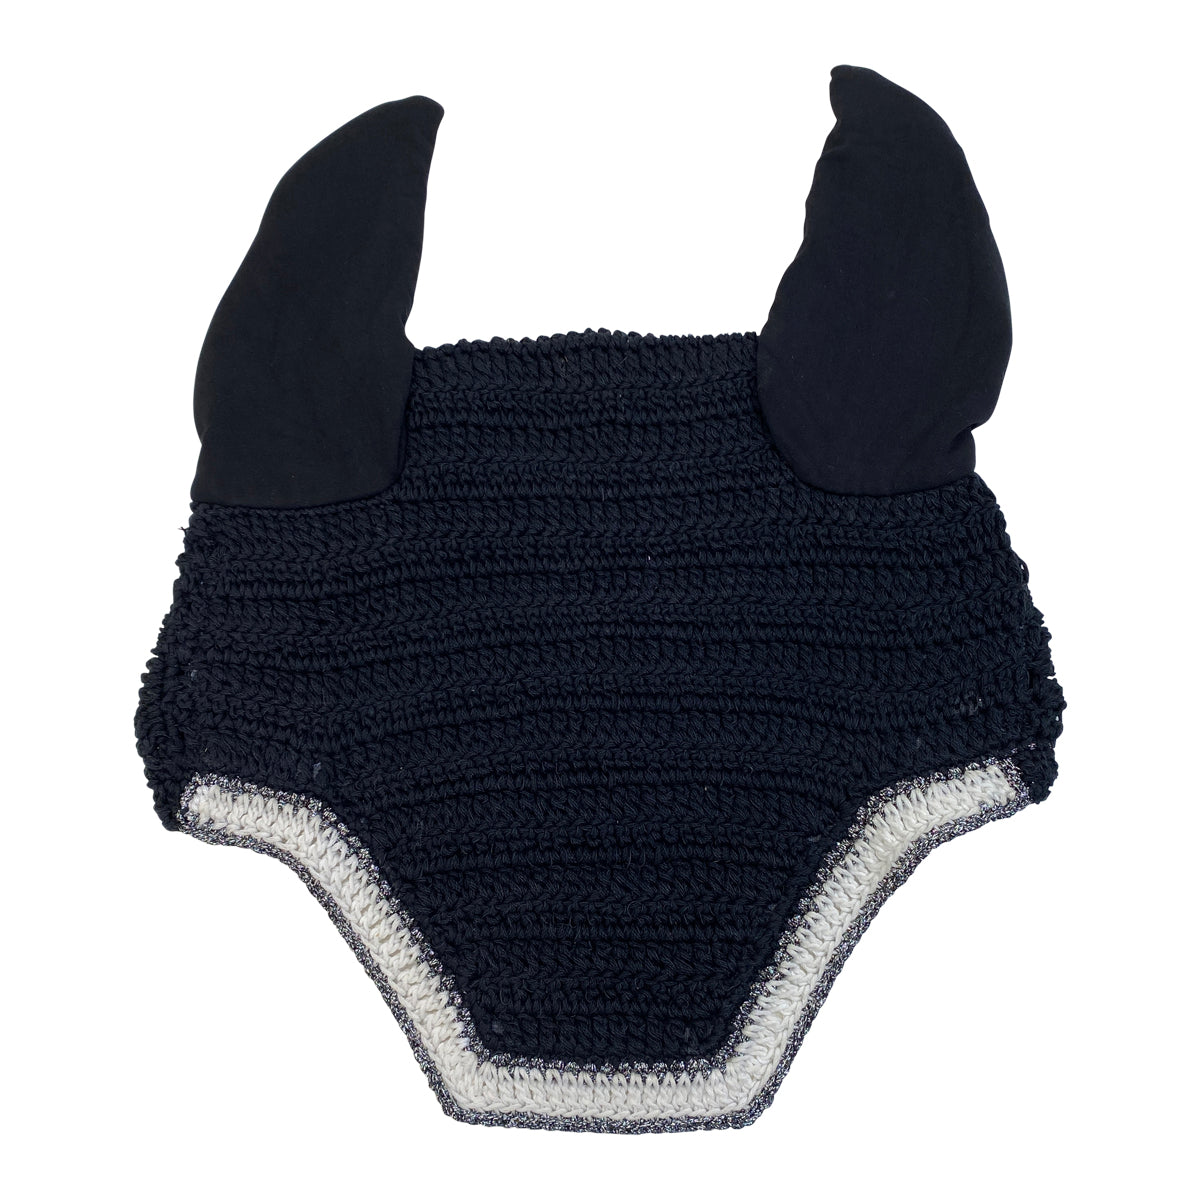 Draper Equine Therapy® Fly Bonnet in Black w/White